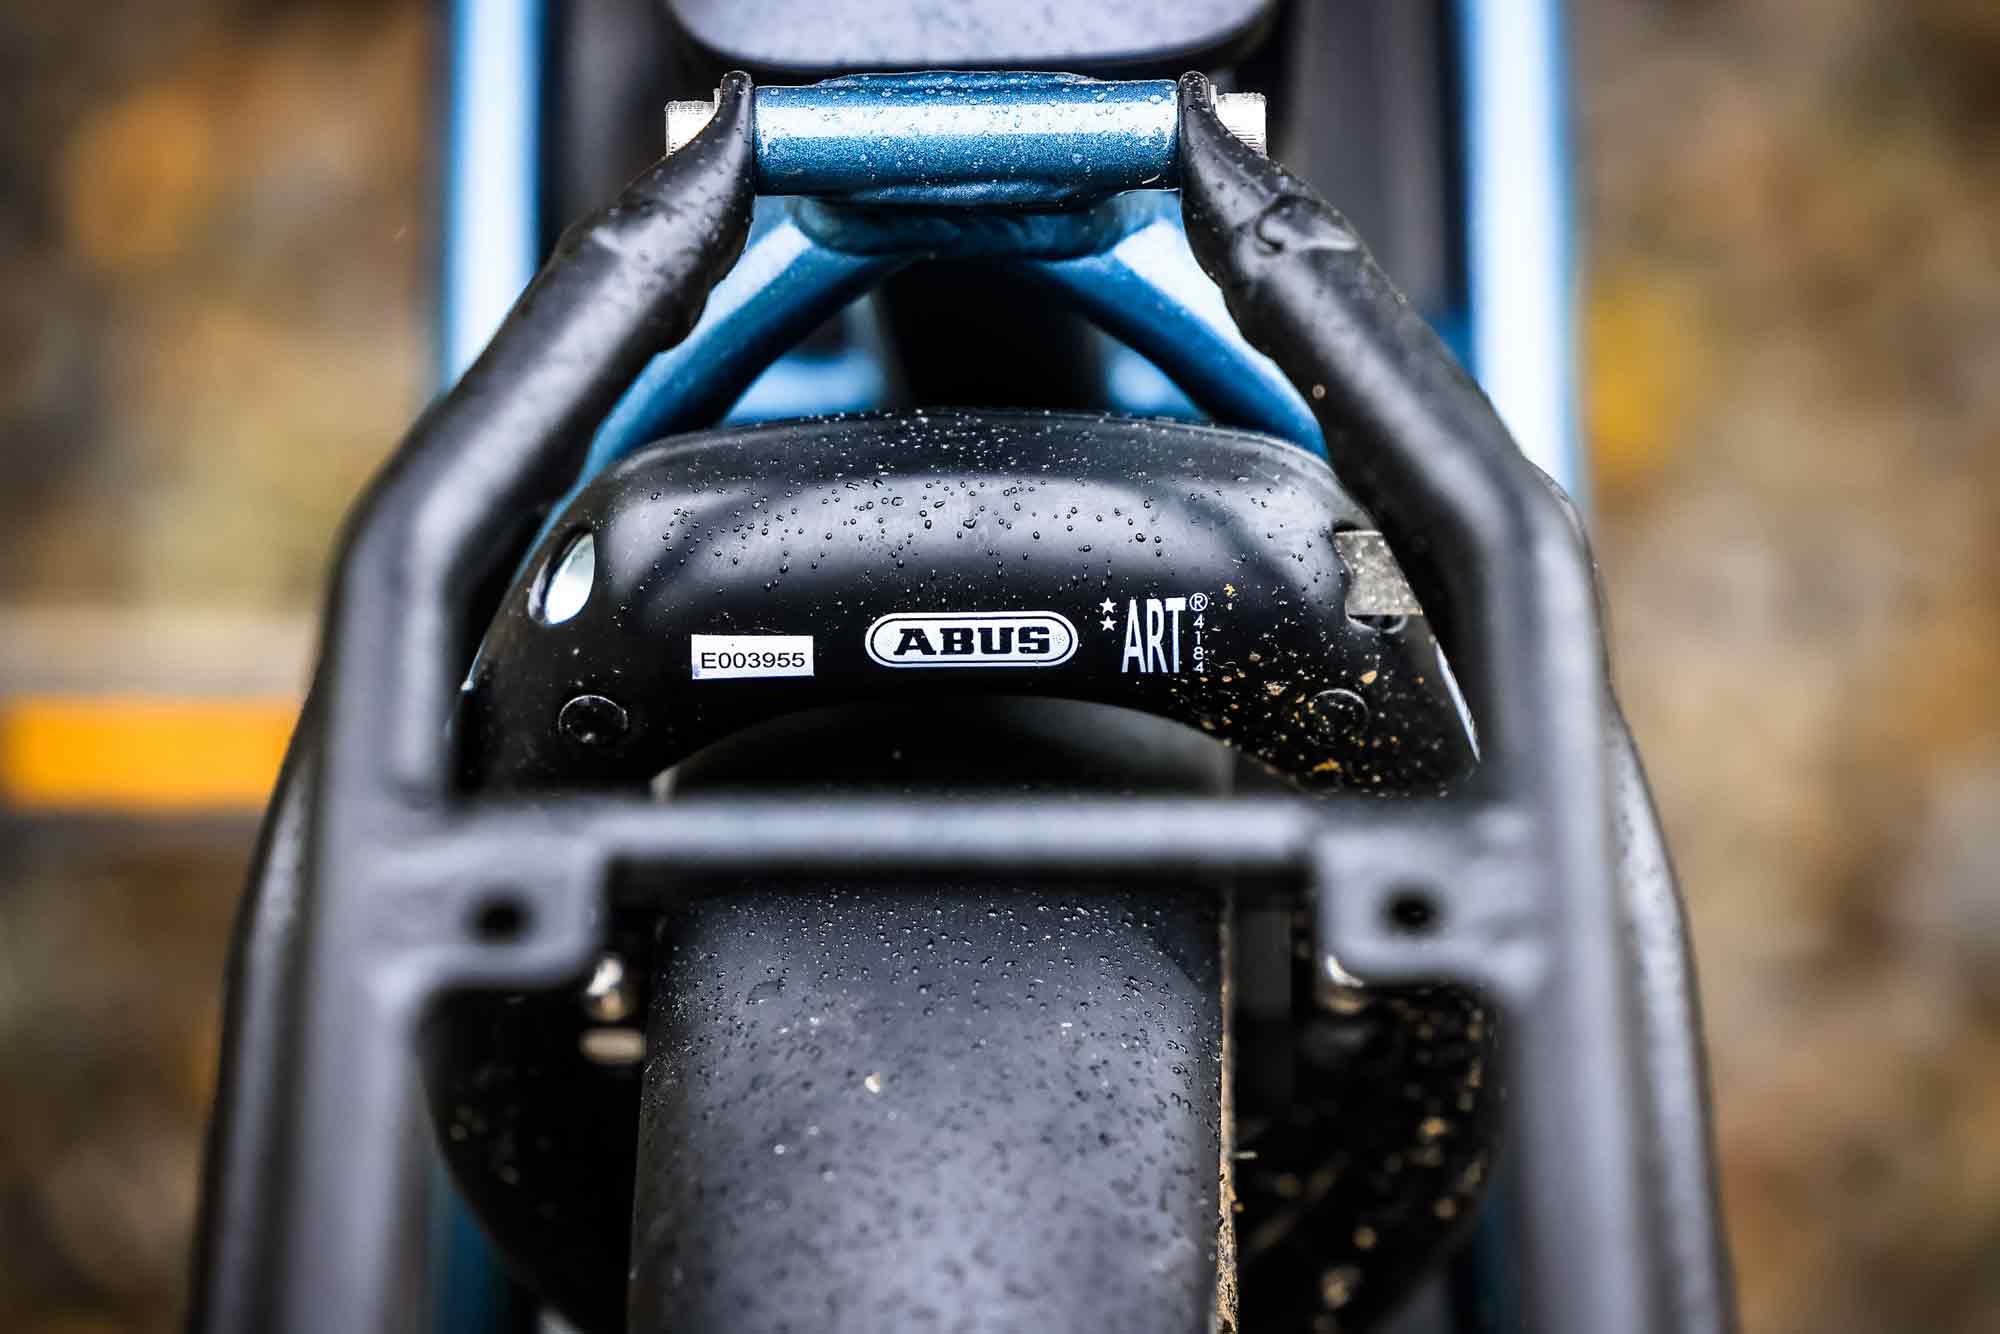 The abus frame lock is practical, but of course not a particularly secure solution. However, abus offers optional chain locks that can be attached directly to the frame lock. This allows you to connect the bike to a lantern, for example.